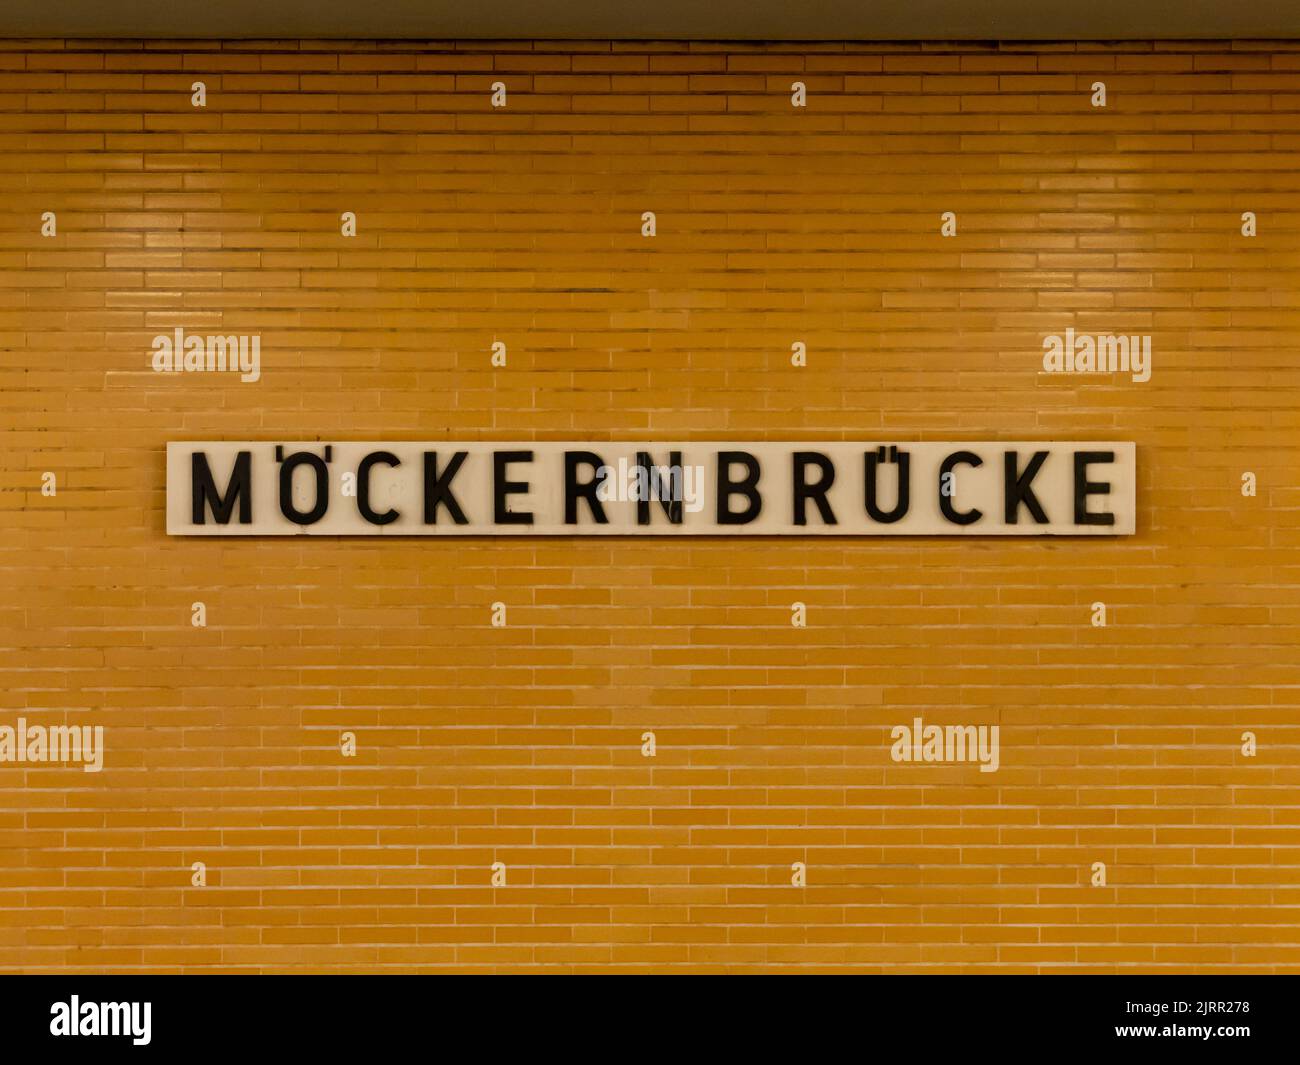 Möckernbrücke U-Bahn station in Berlin city. Old design with a yellow tiled wall exterior. Black letters on a white board. Subway station name board. Stock Photo